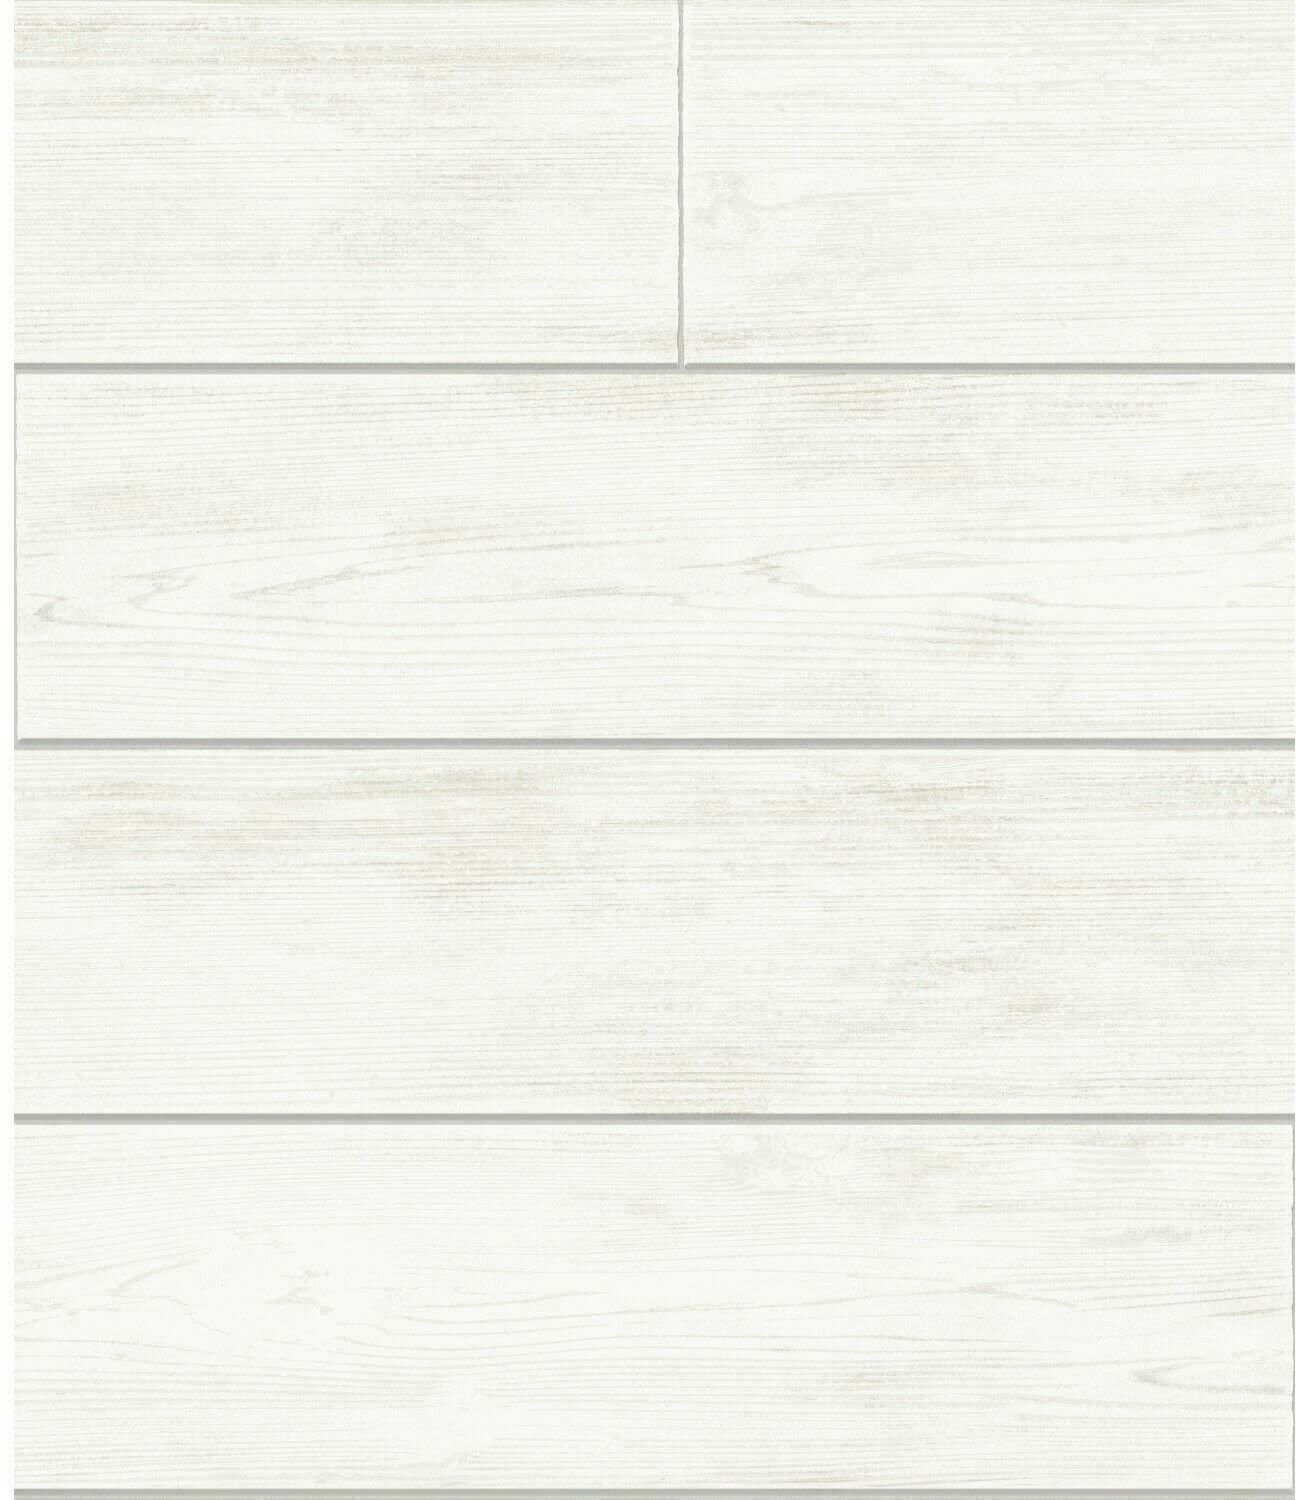 Magnolia Home Joanna Gaines Off White Shiplap Wood on Sure Strip Wallp 4 Walls Wallpaper